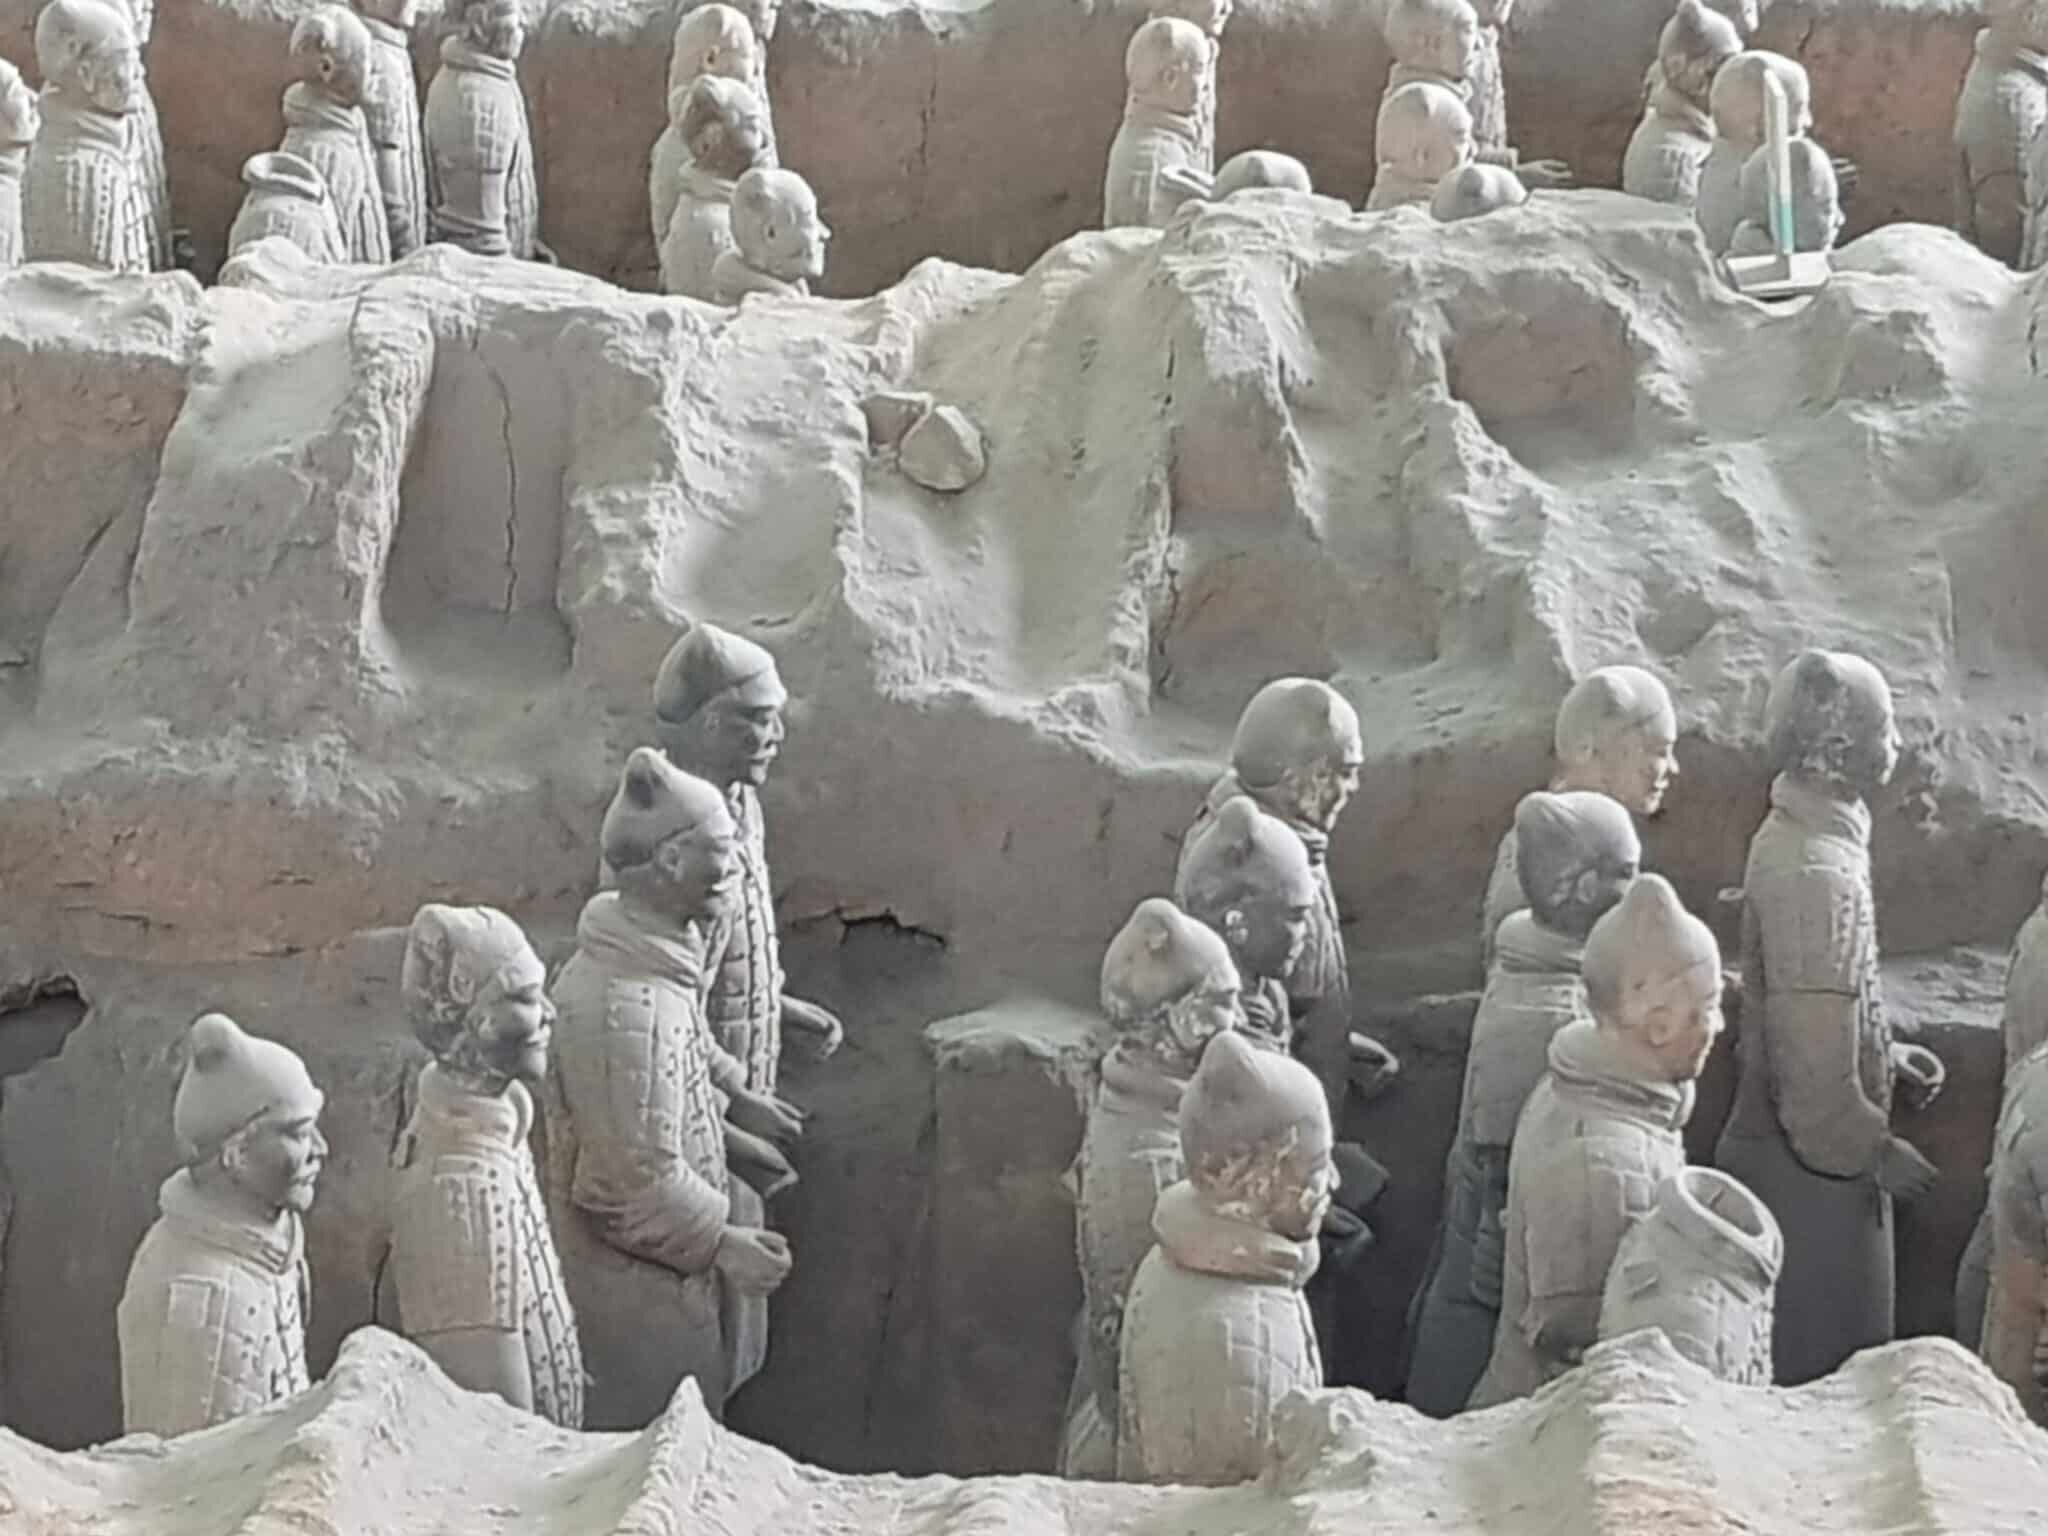 Terracotta army, one of the eight wonders of the world